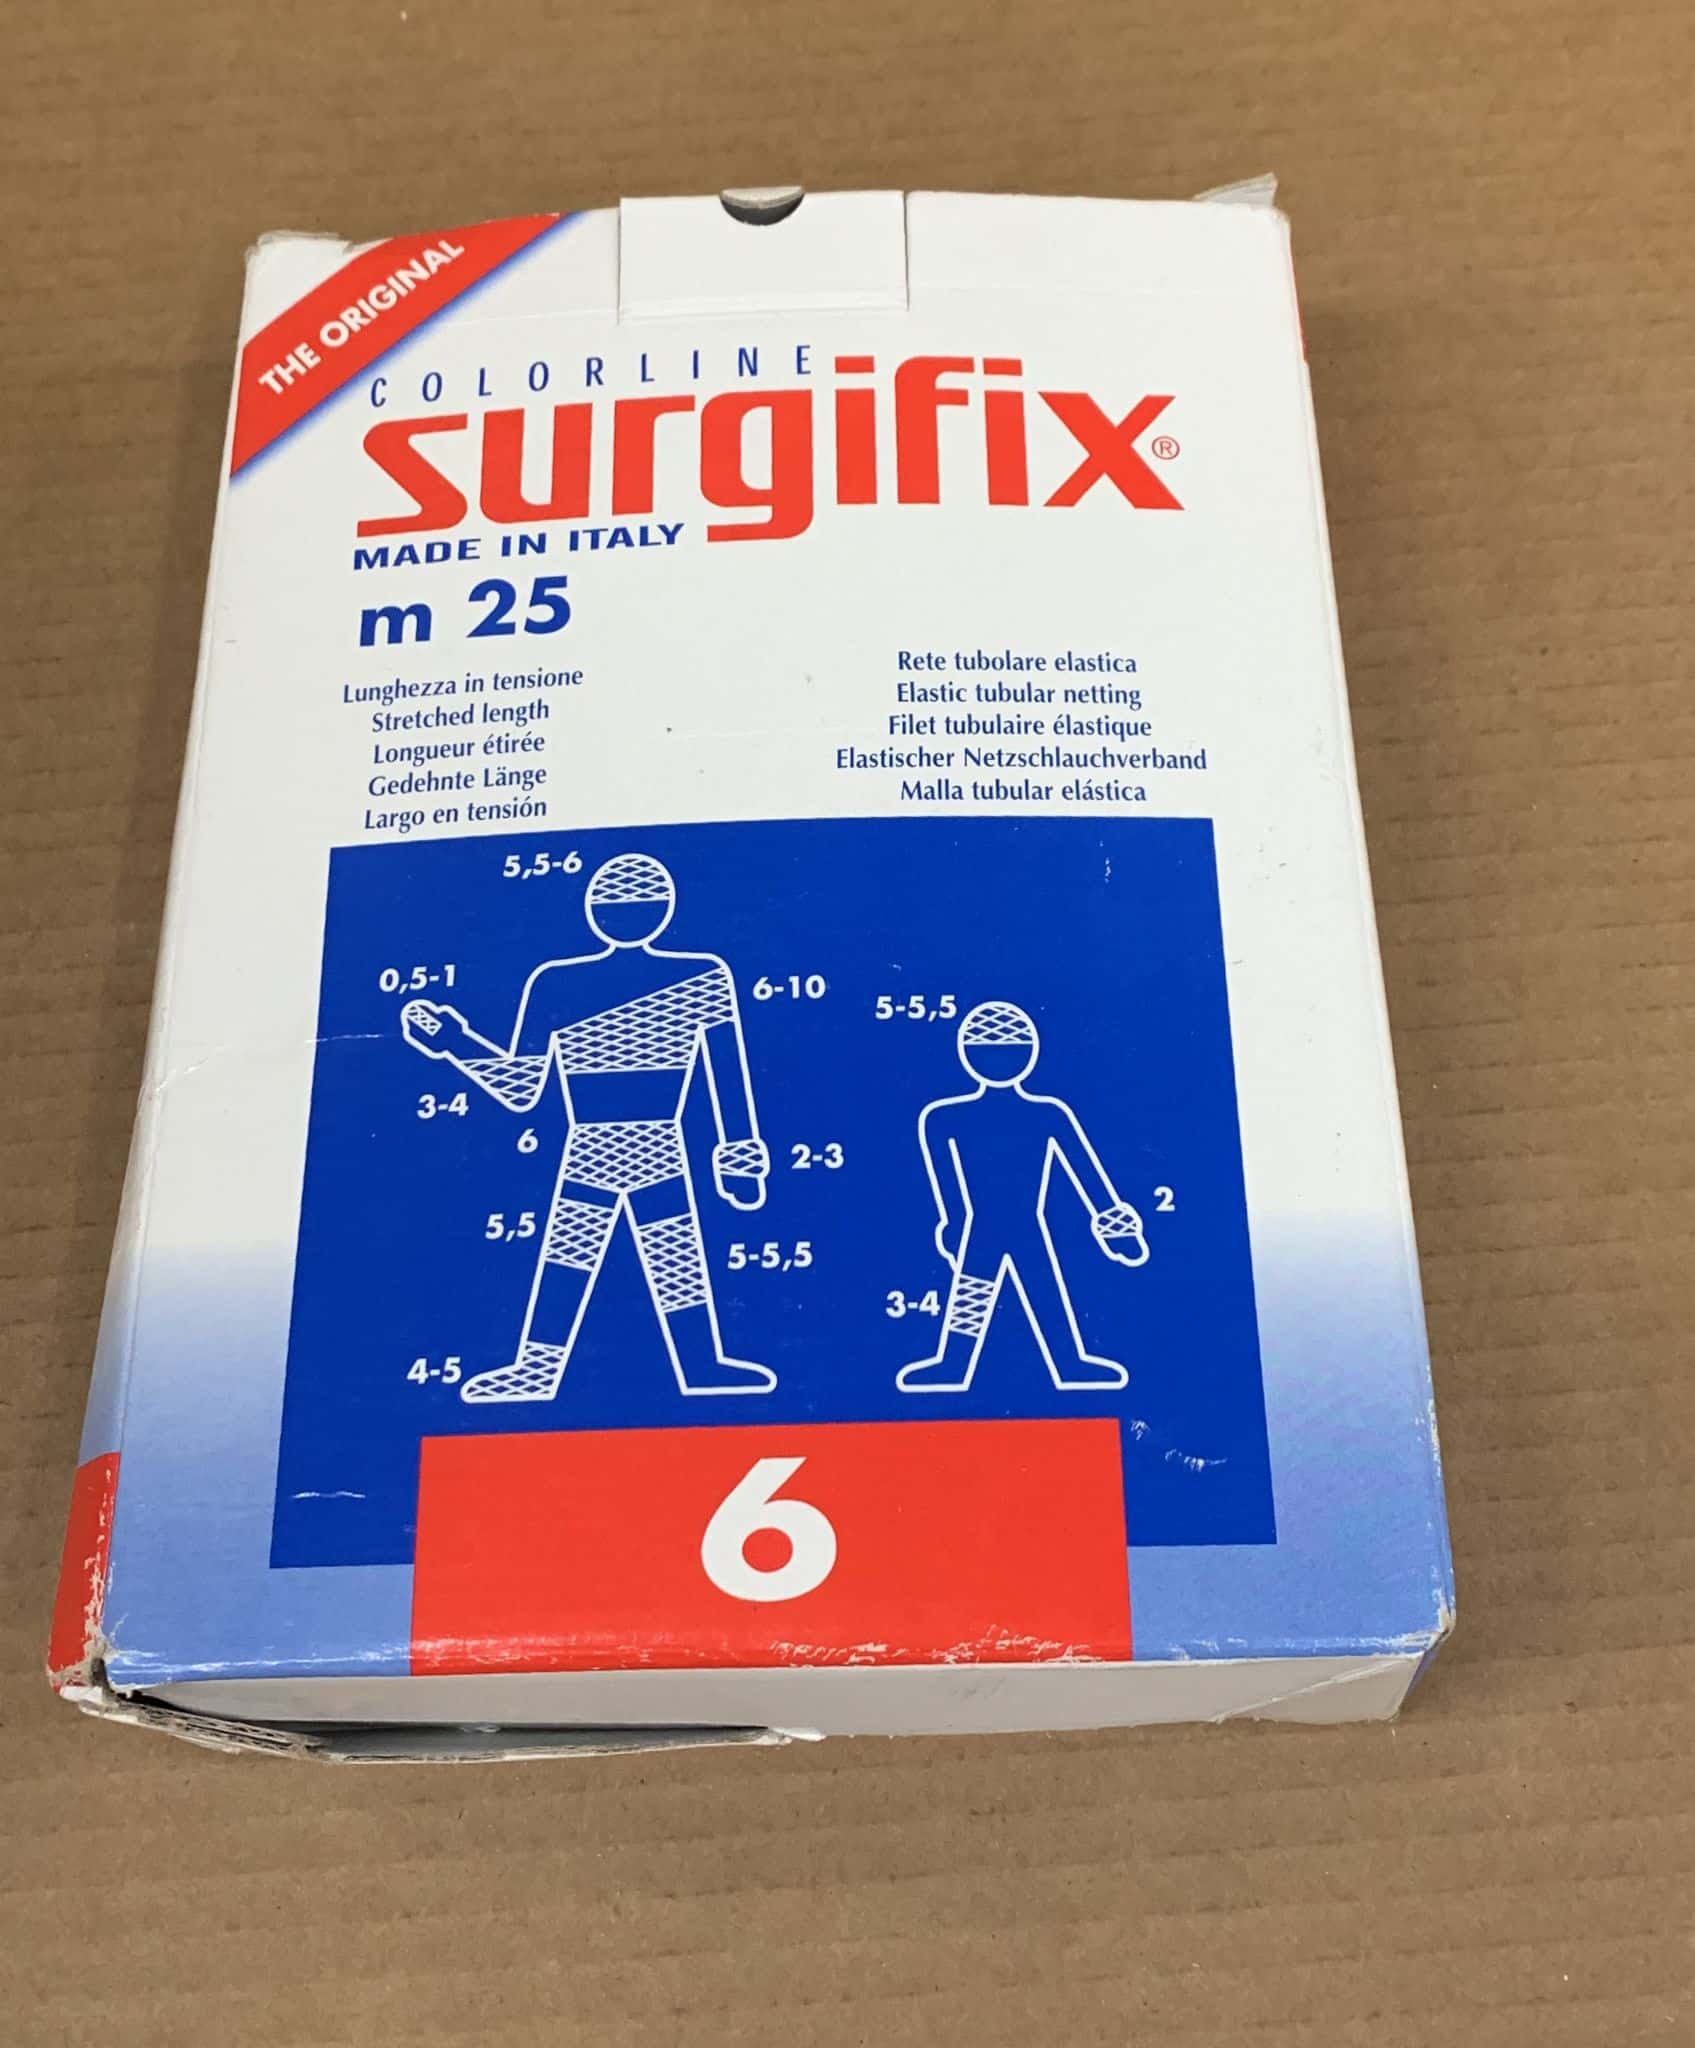 Surgifix Elastic Tubular Netting 25m. Size: 6 (Ideal for genital, femoral Regions, and Head) 6653